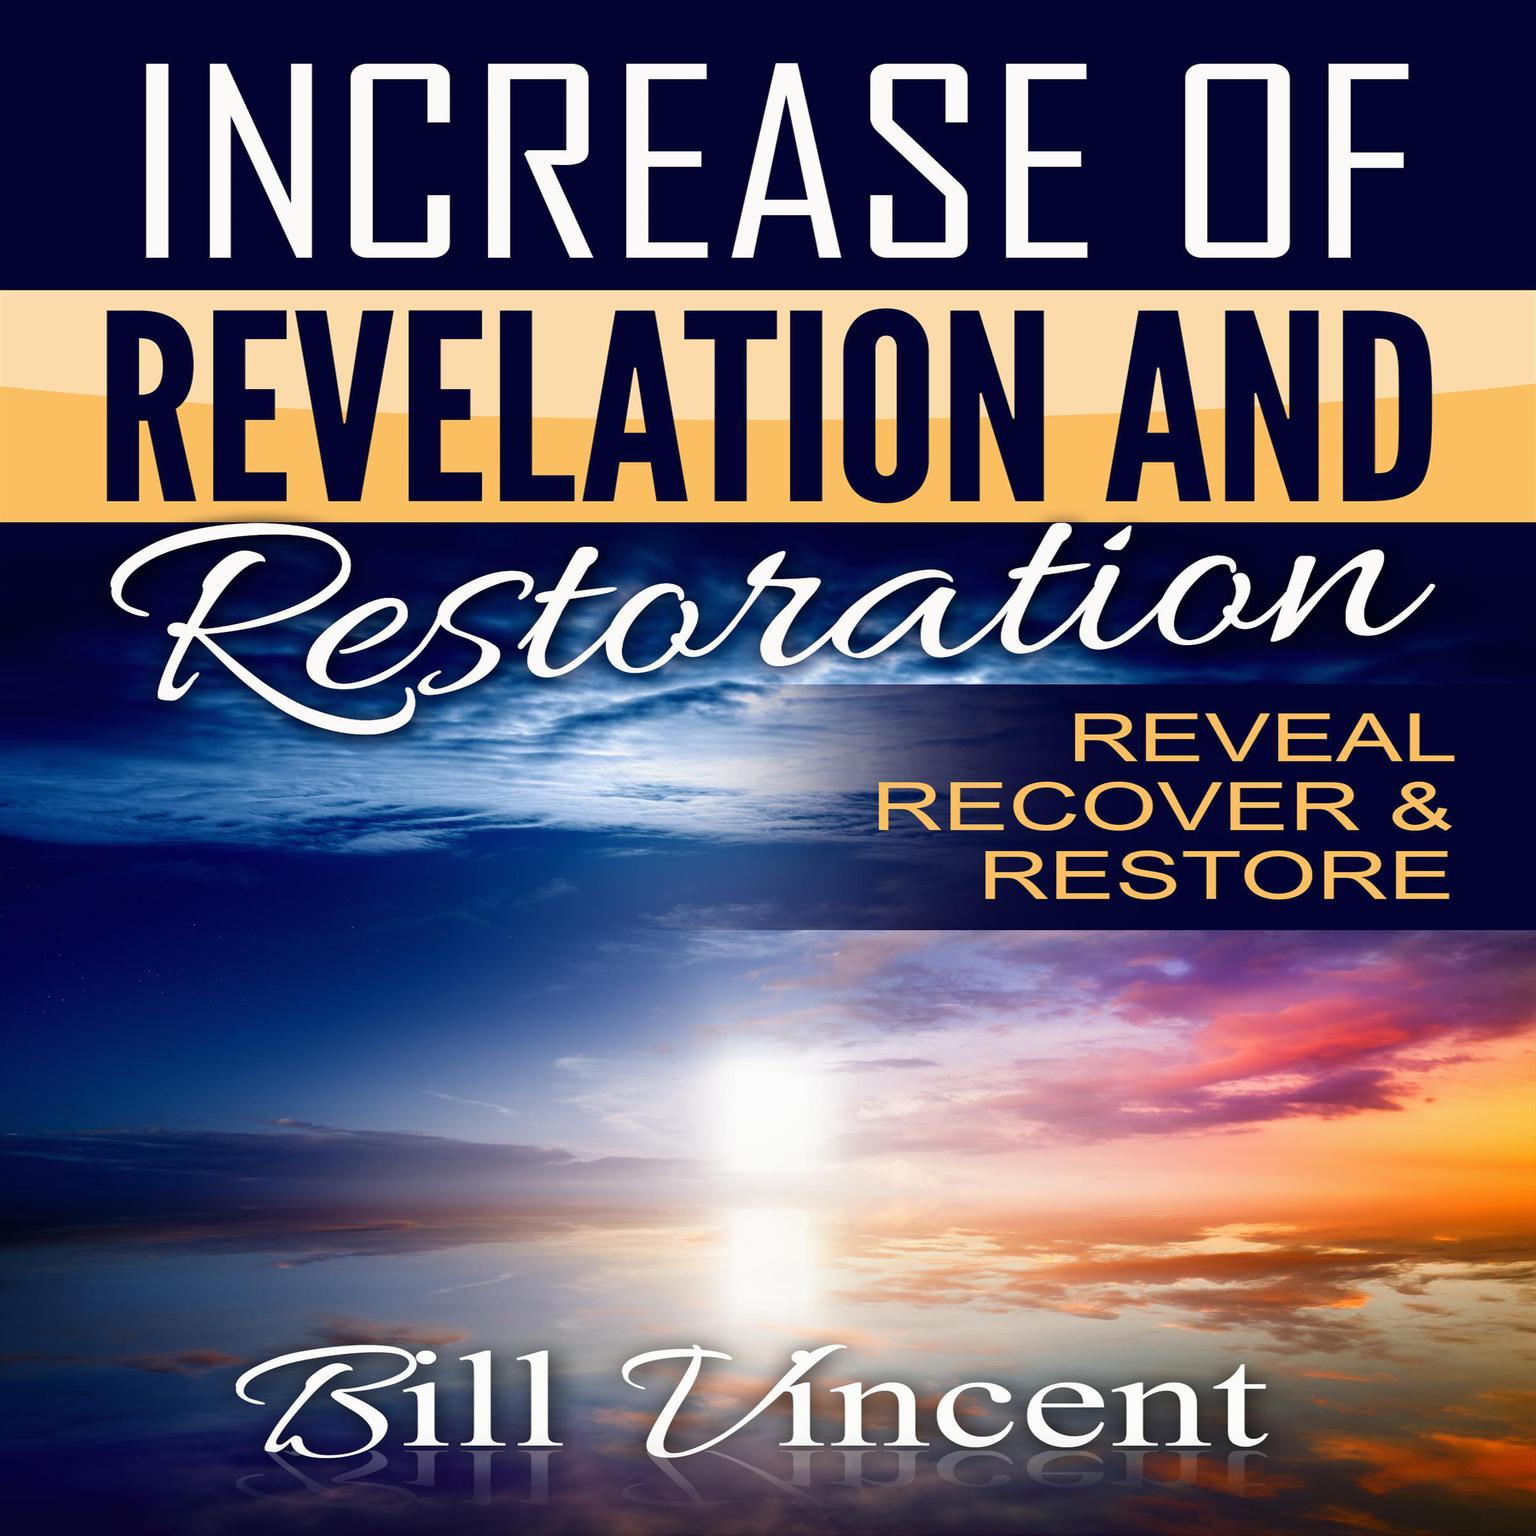 Increase of Revelation and Restoration Audiobook, by Bill Vincent